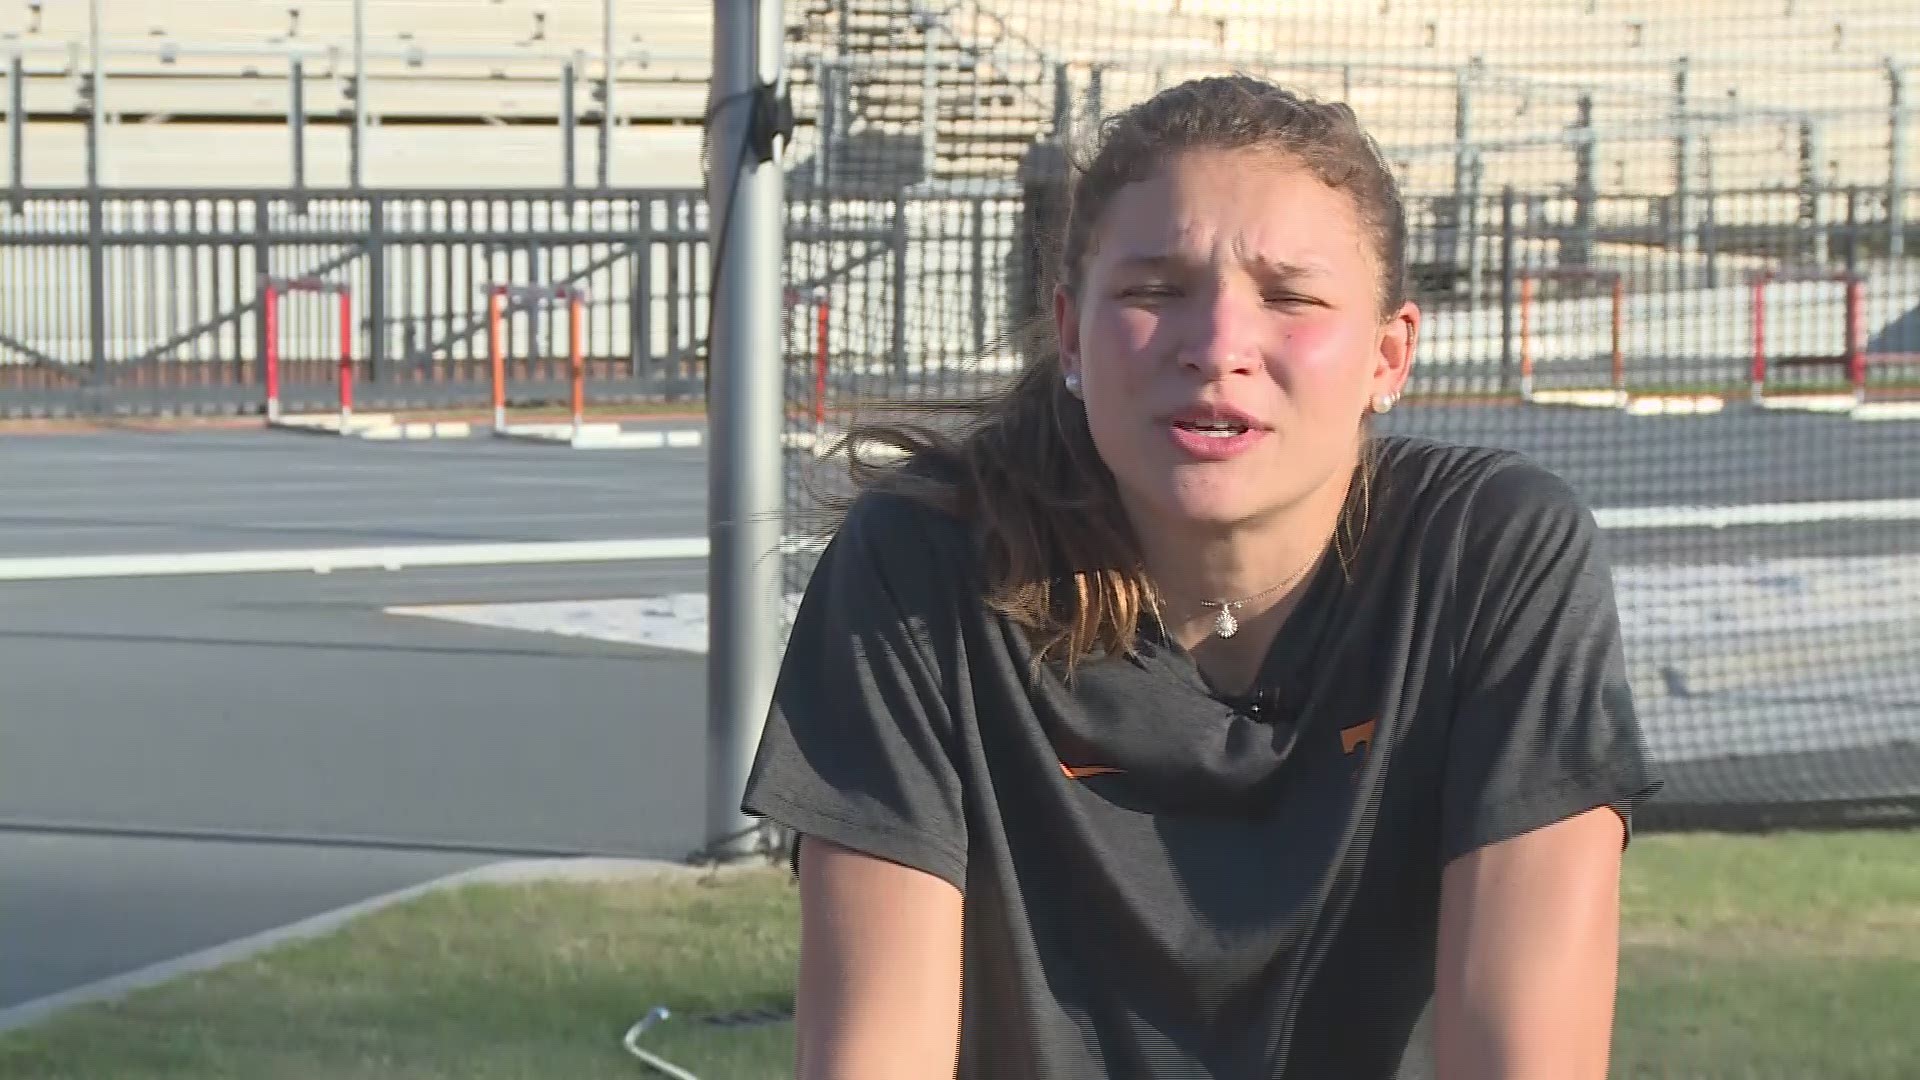 Tennessee freshman track athlete Martina Weil arrived in Knoxville from Santiago, Chile in January. Both of her parents were Olympians and she already owns Chile's national record in the 400 meters.